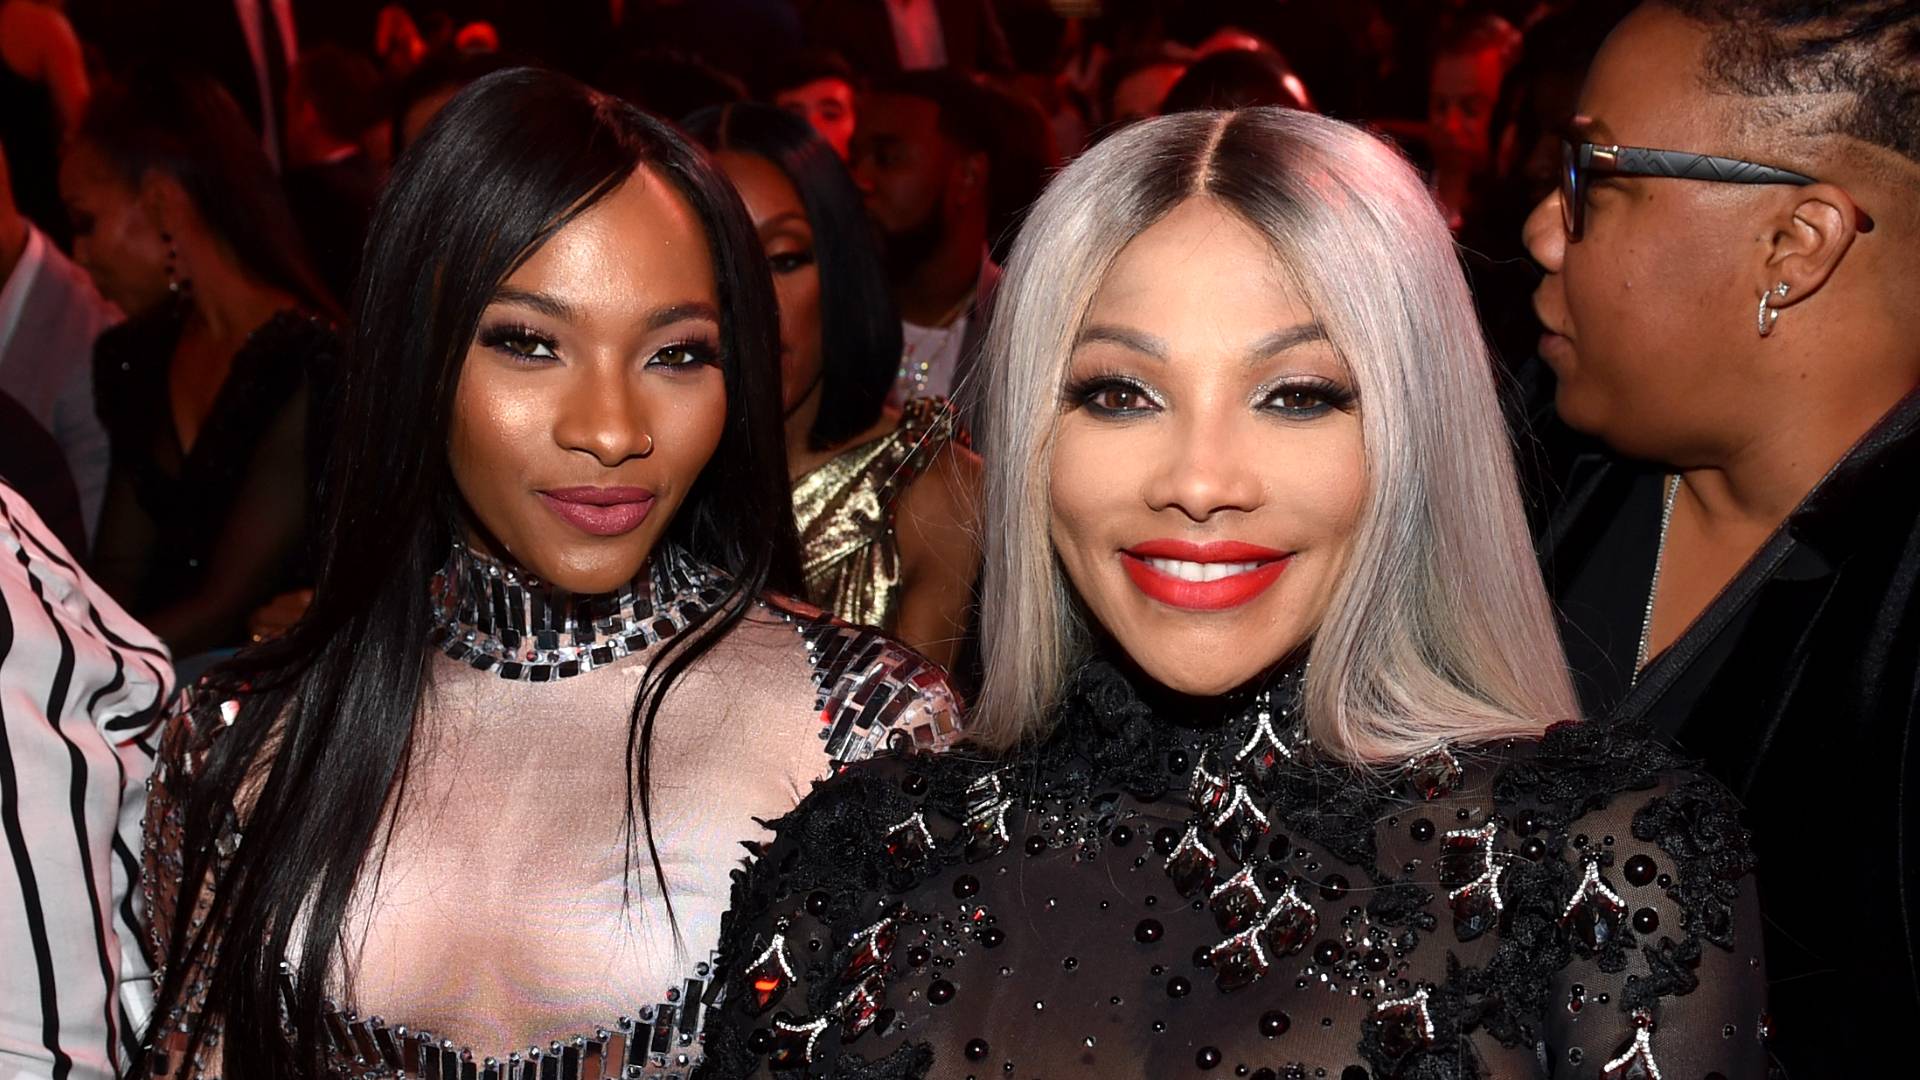 Egypt Criss (L) and Sandra Denton attend the 2018 Billboard Music Awards at MGM Grand Garden Arena on May 20, 2018 in Las Vegas, Nevada. 